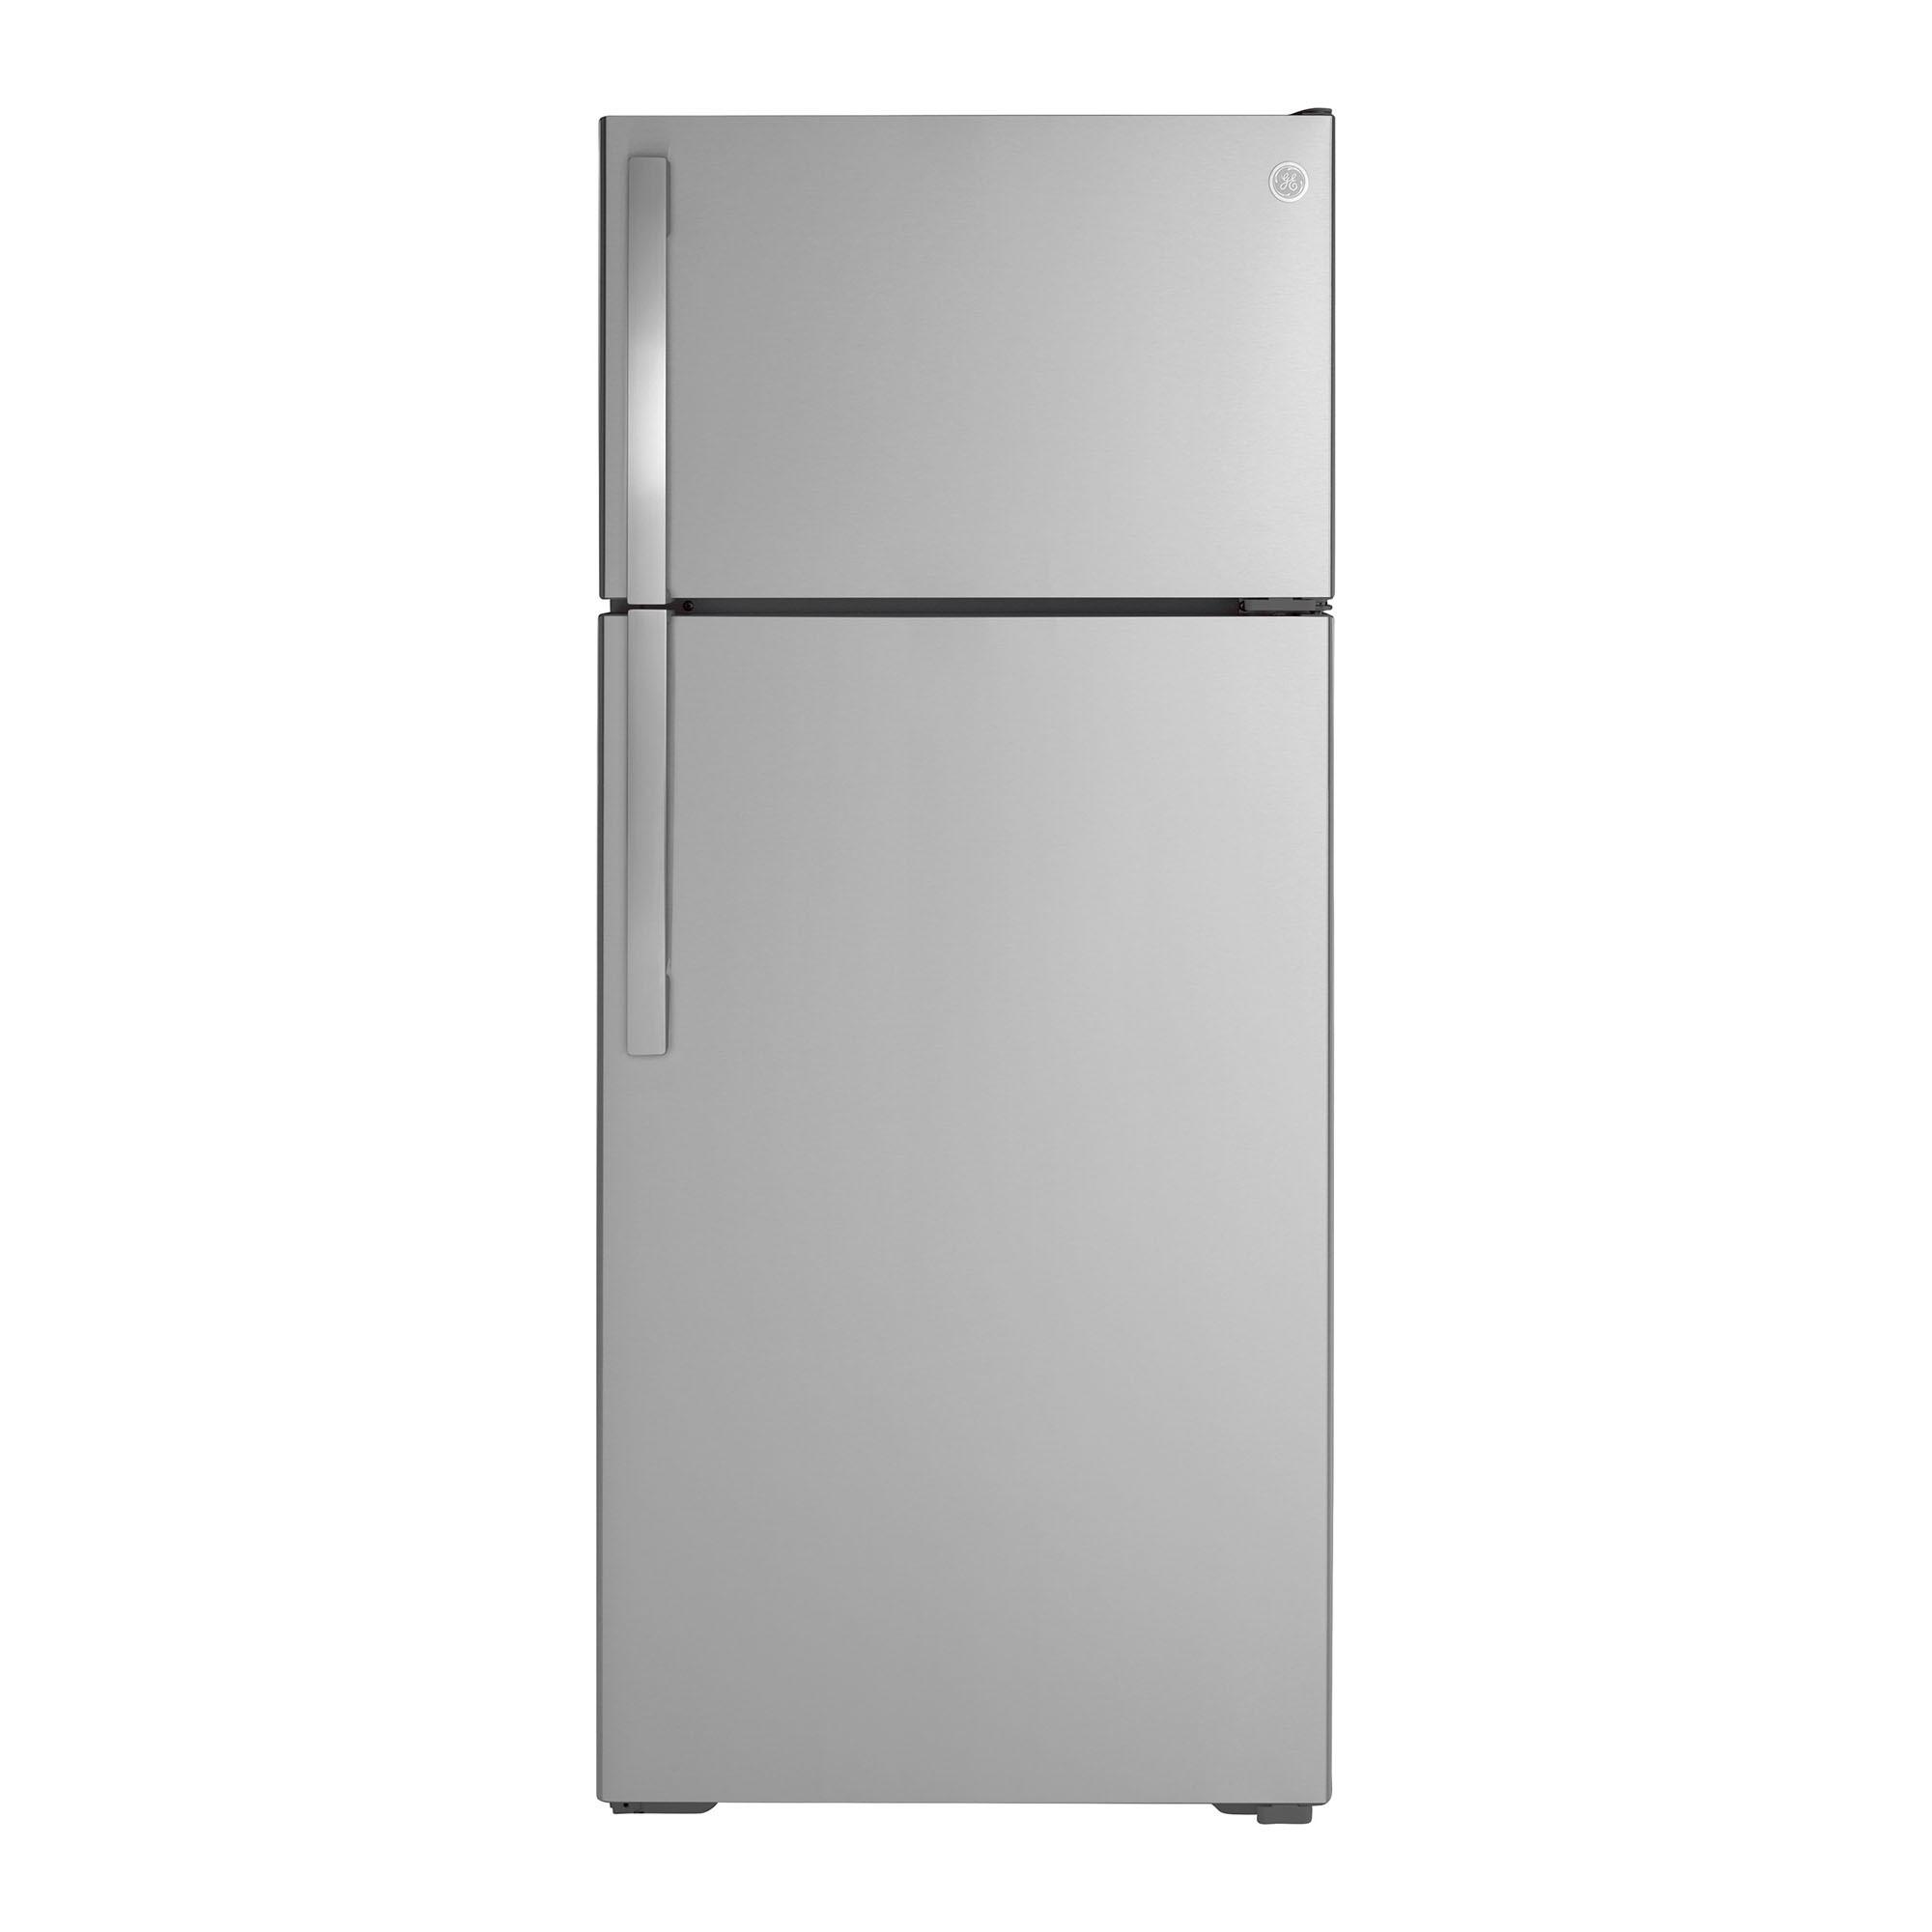 Rent to Own GE Appliances 21.9 cu. ft. Top Mount Refrigerator - Black at  Aaron's today!